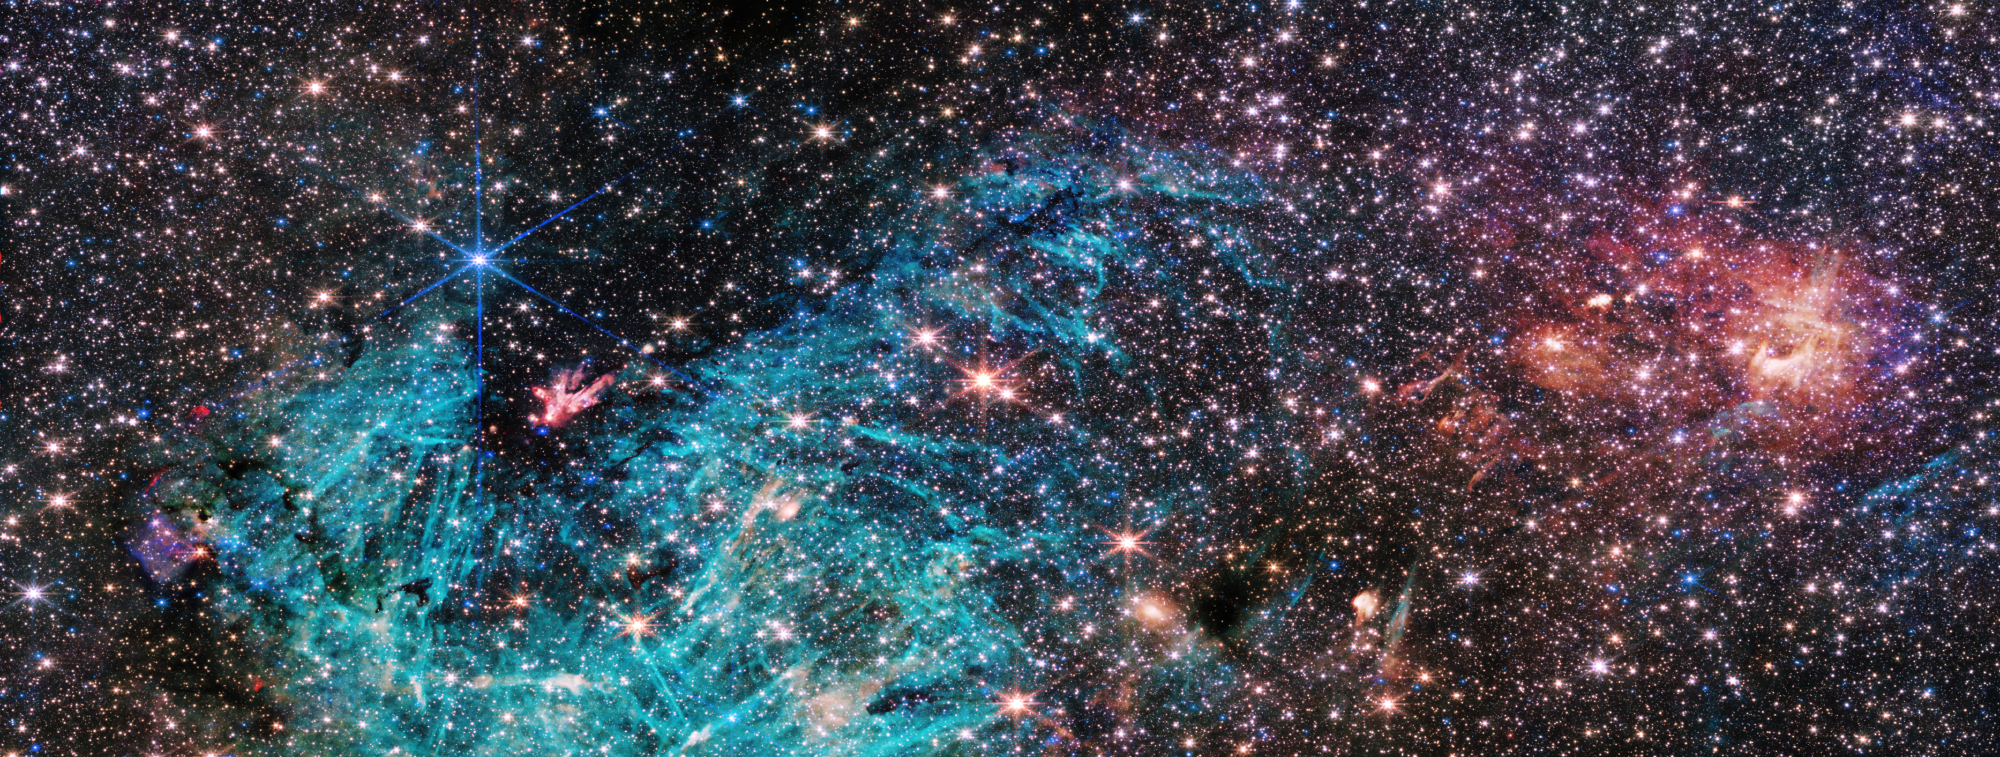 he full view of the James Webb Space Telescope’s NIRCam (Near-Infrared Camera) instrument reveals a 50 light-years-wide portion of the Milky Way’s dense center. An estimated 500,000 stars shine in this image of the Sagittarius C (Sgr C) region, along with some as-yet unidentified features. 